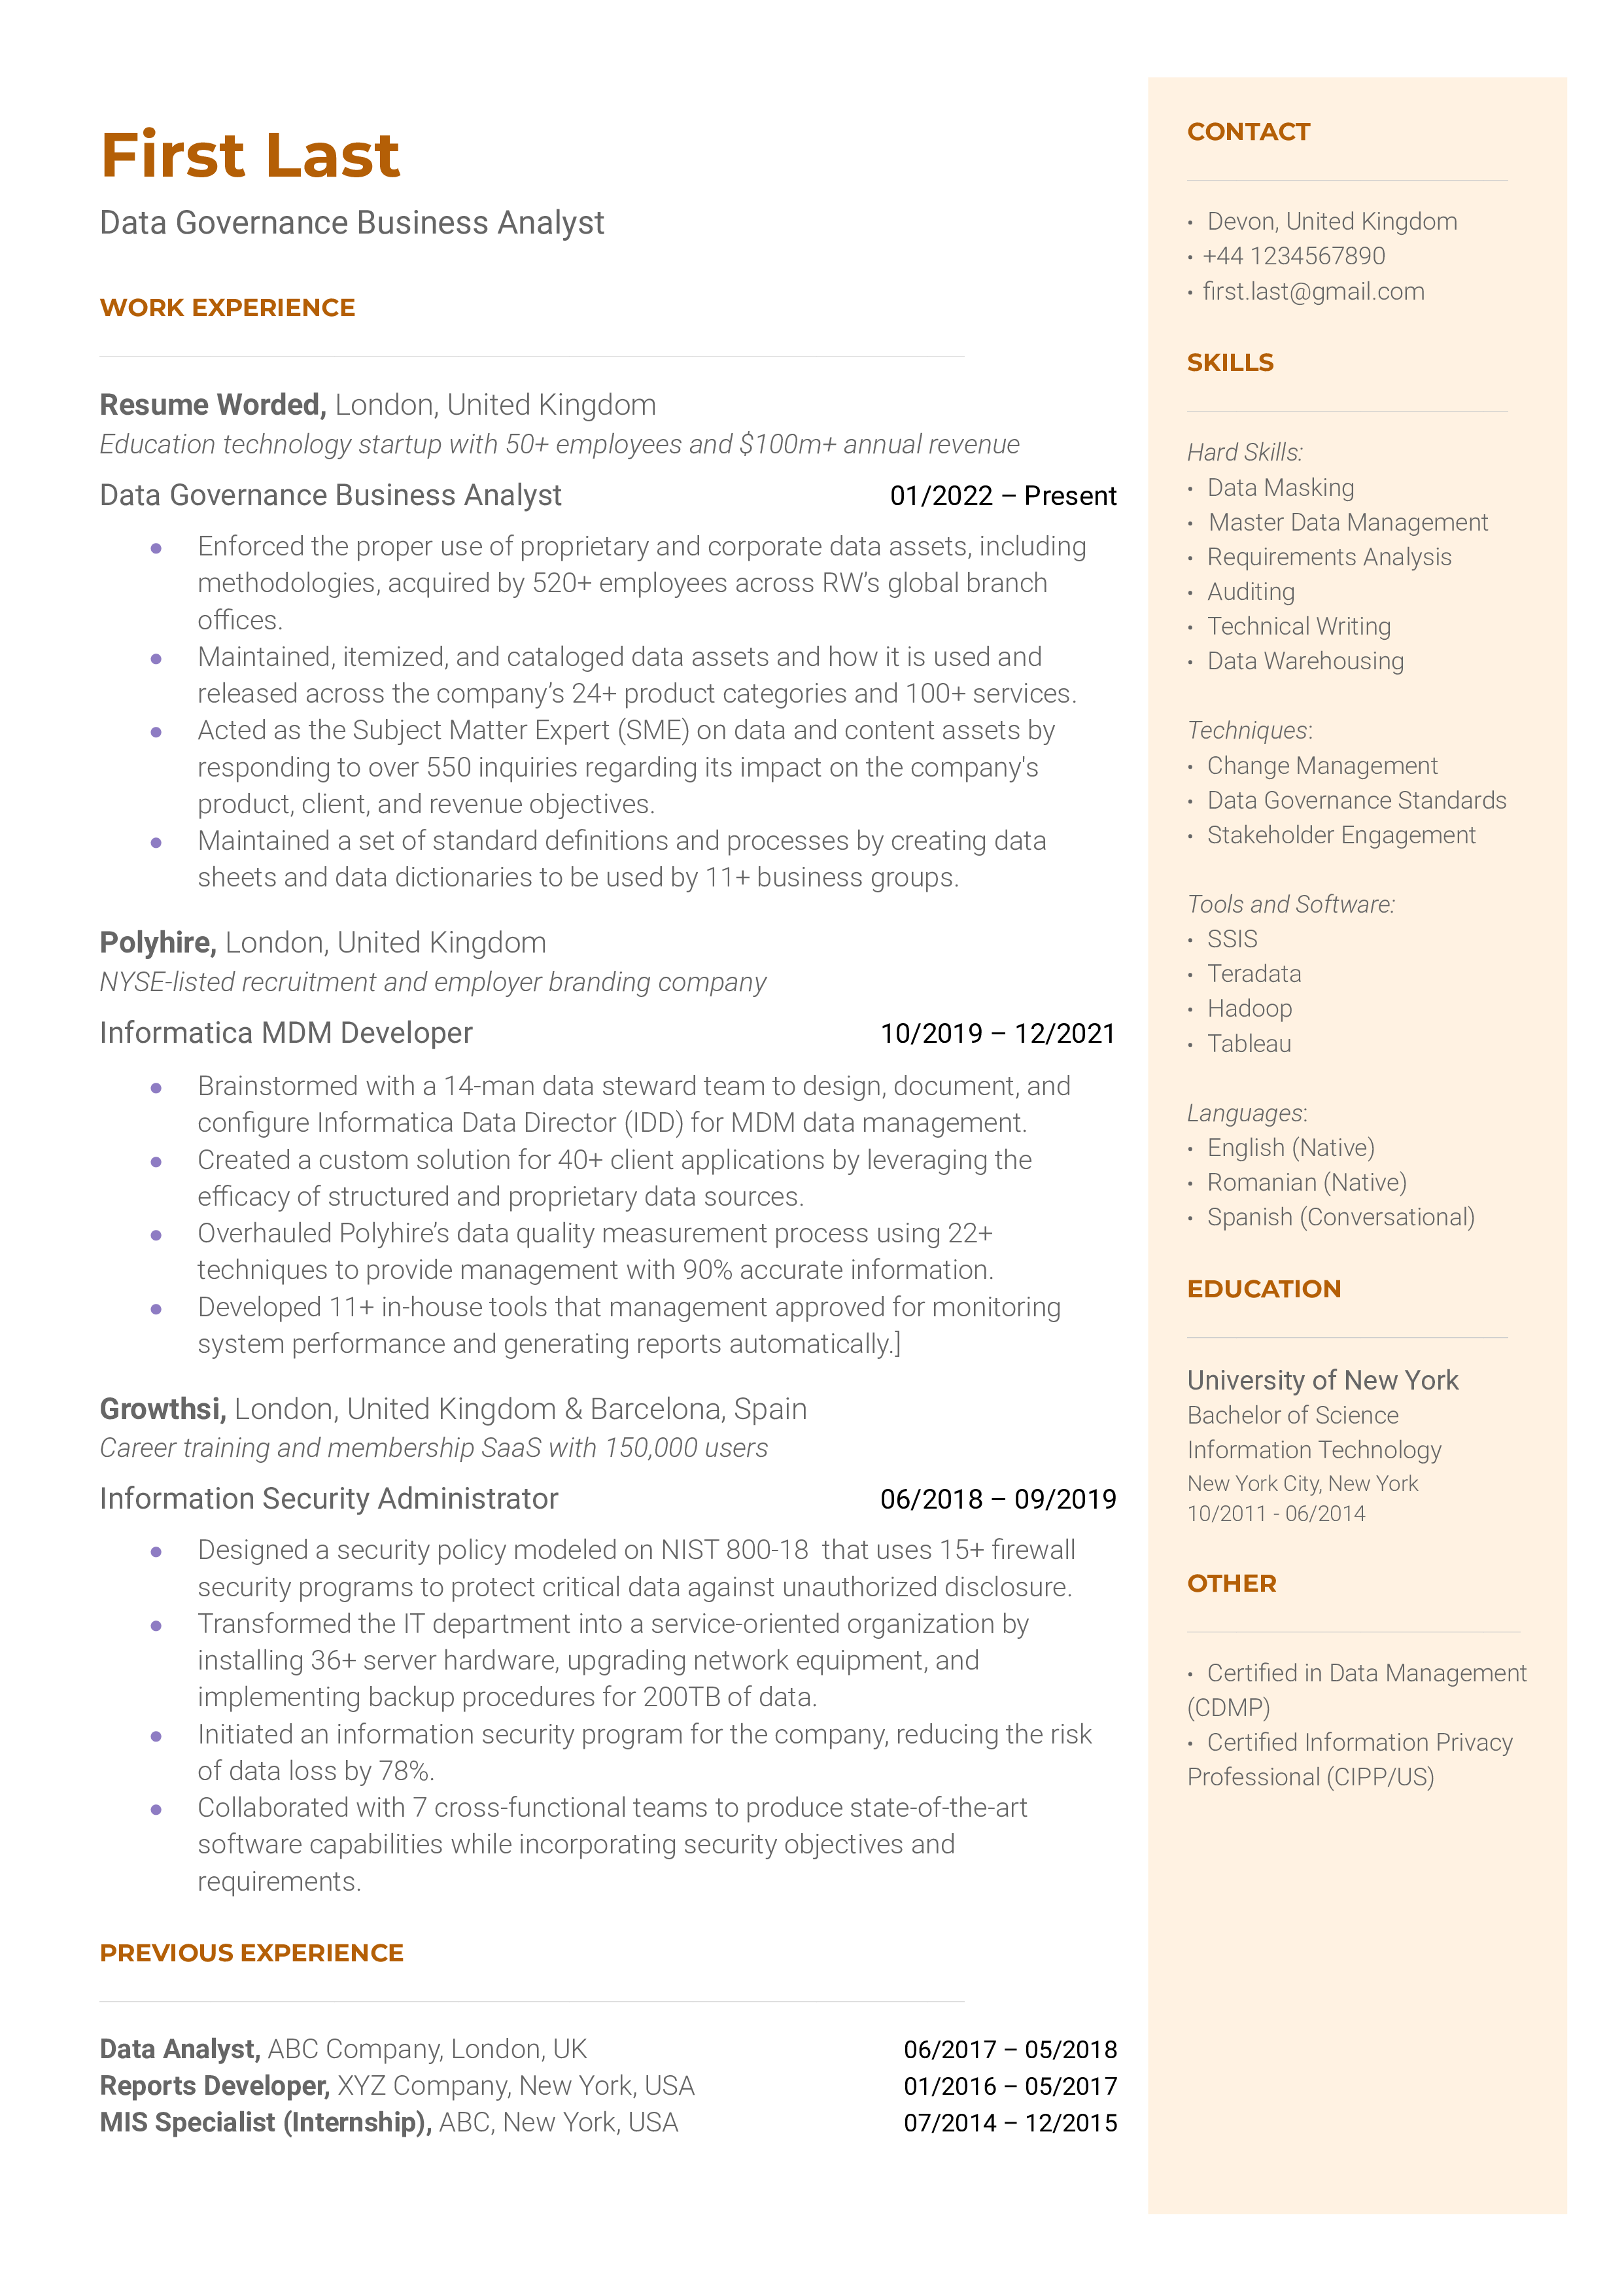 A data governance business analyst resume template emphasizing achievements. 